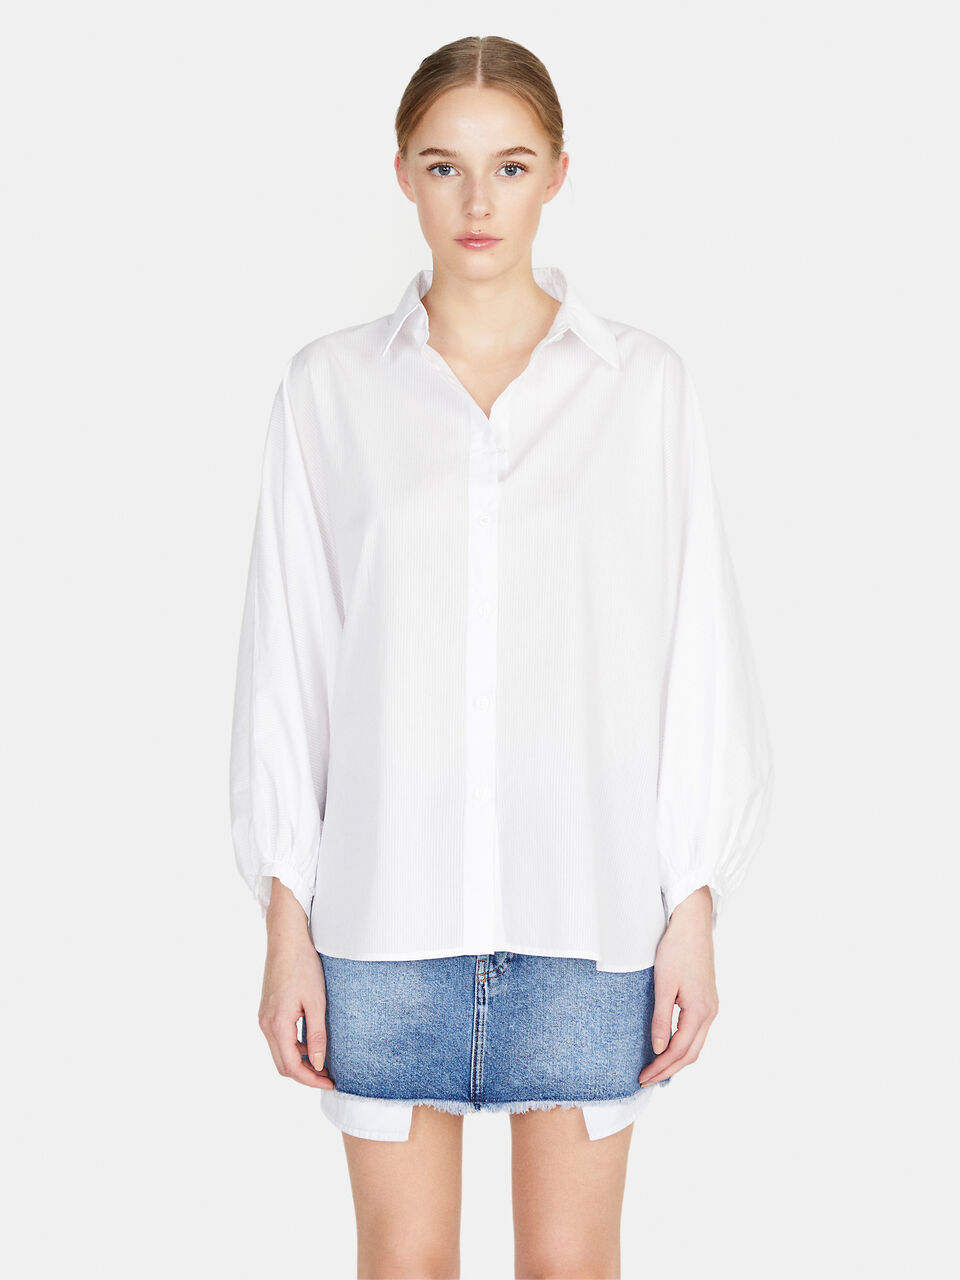 Women's Shirts and Blouses 2023 Collection | Sisley UK